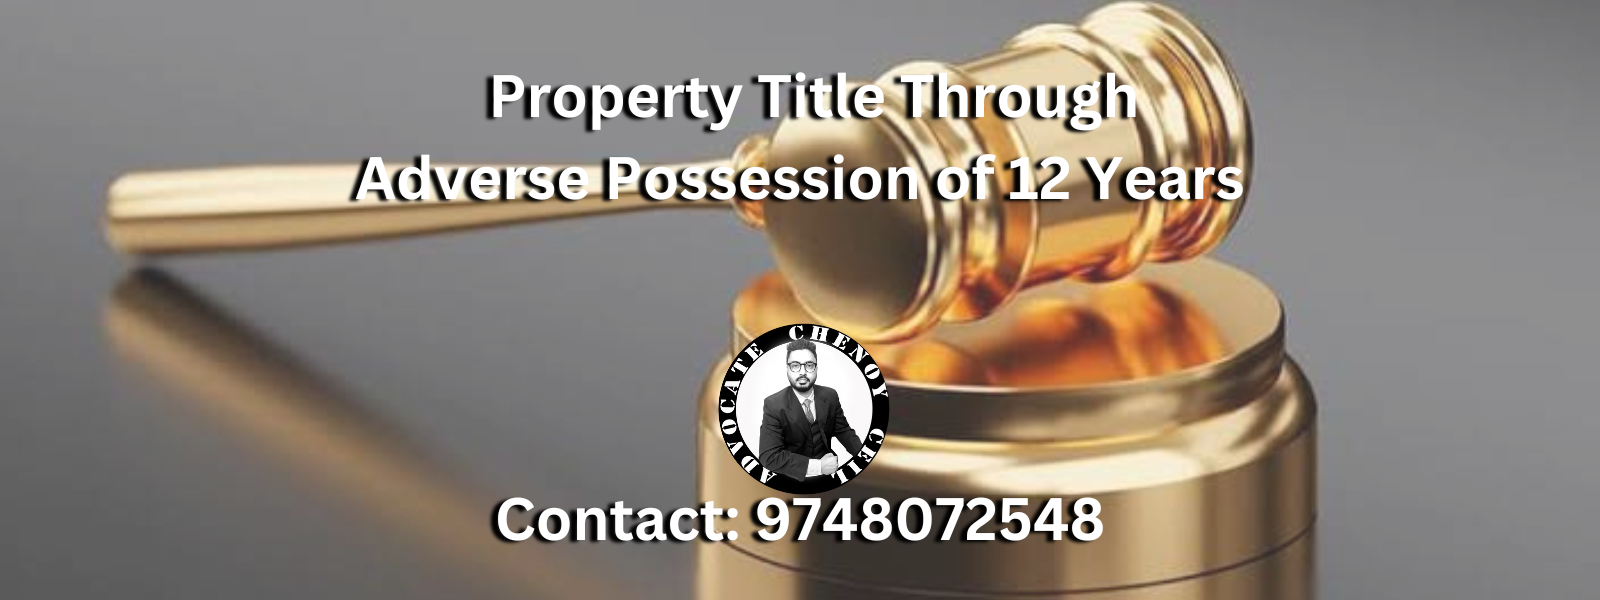 Property Title through Adverse Possession